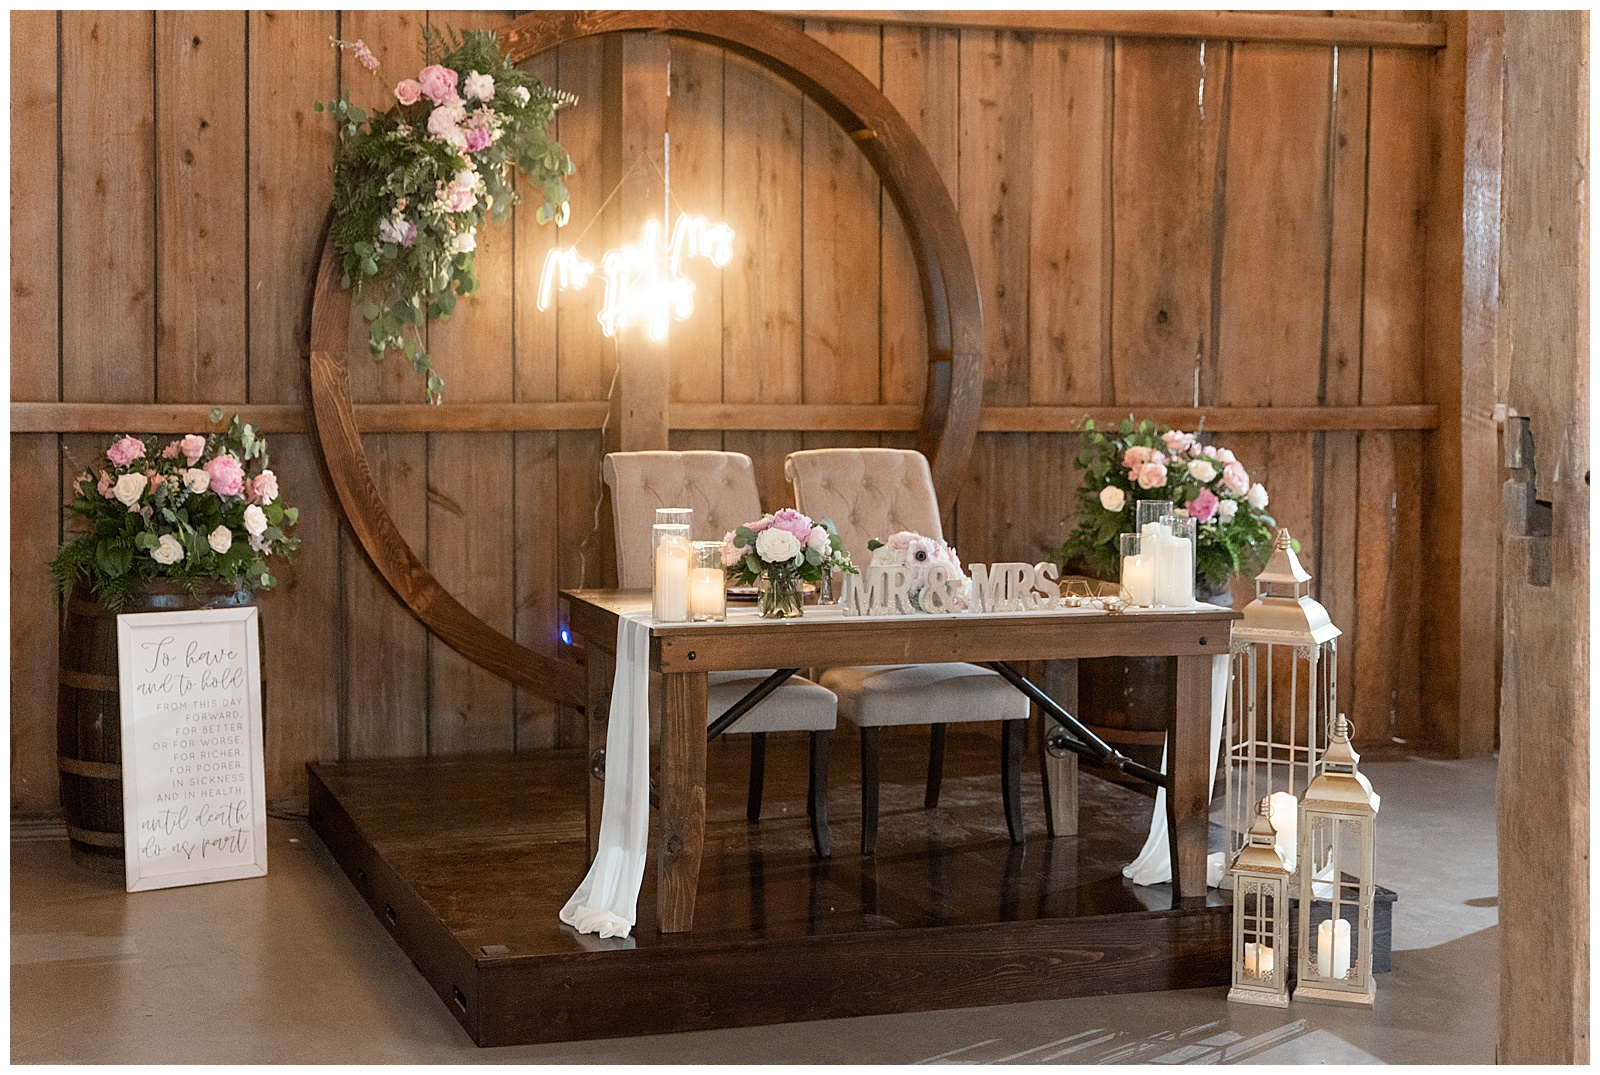 wooden couples table with round wooden structure behind them beautifully decorated inside barn at venue in gordonville pennsylvania